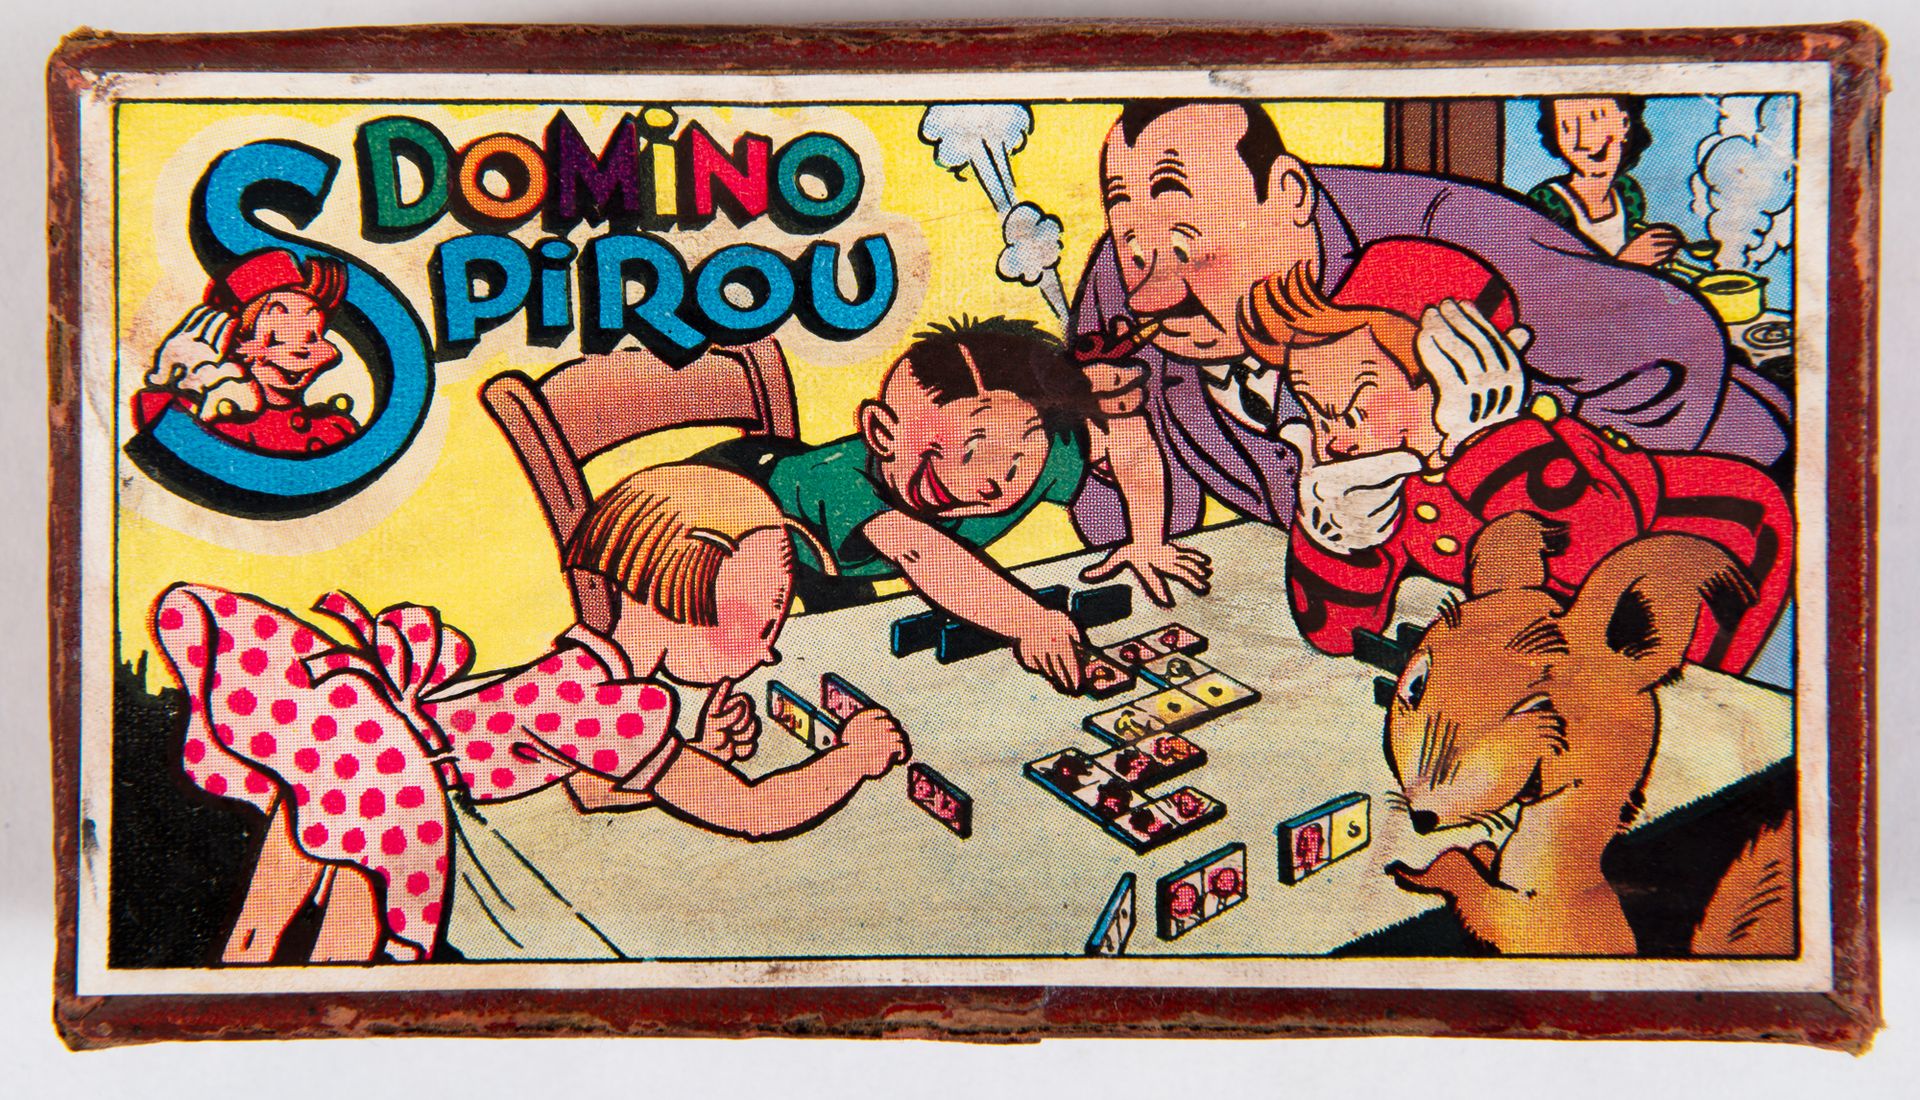 Null Spirou - Domino : Rare game published at the end of the 1940s. Good conditi&hellip;